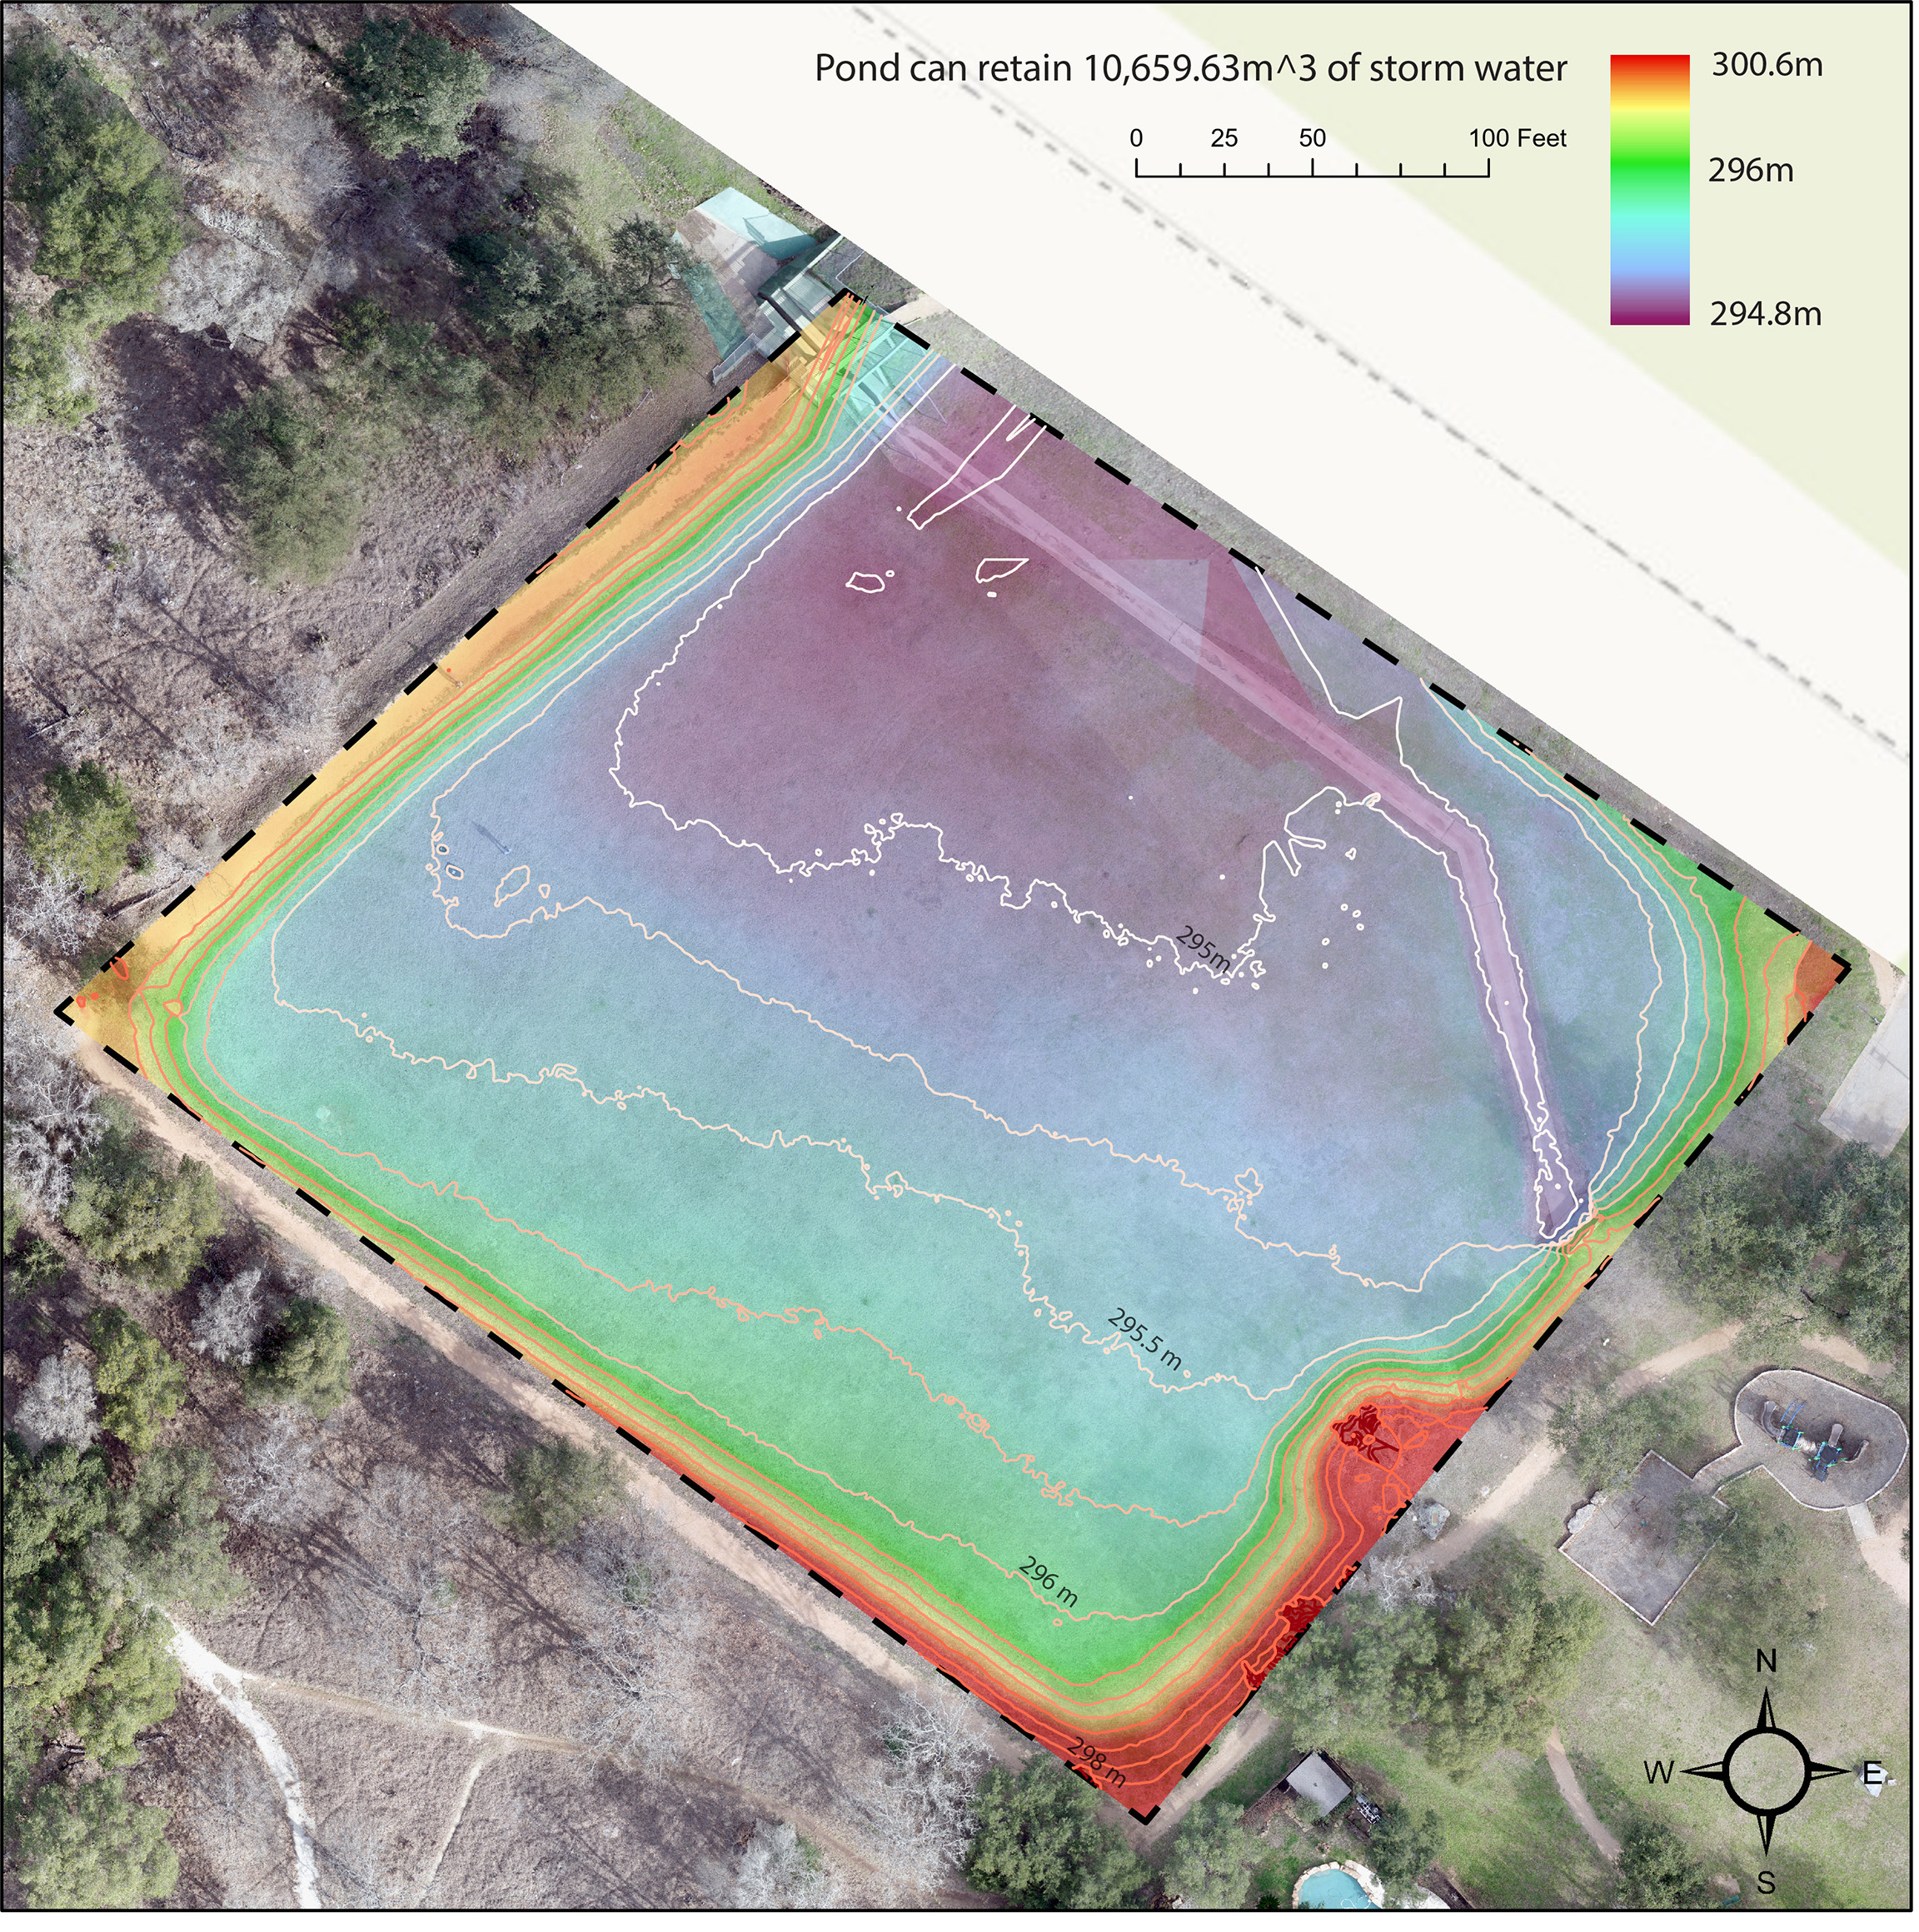 volumetric calculations for retention pond using high resolution drone data